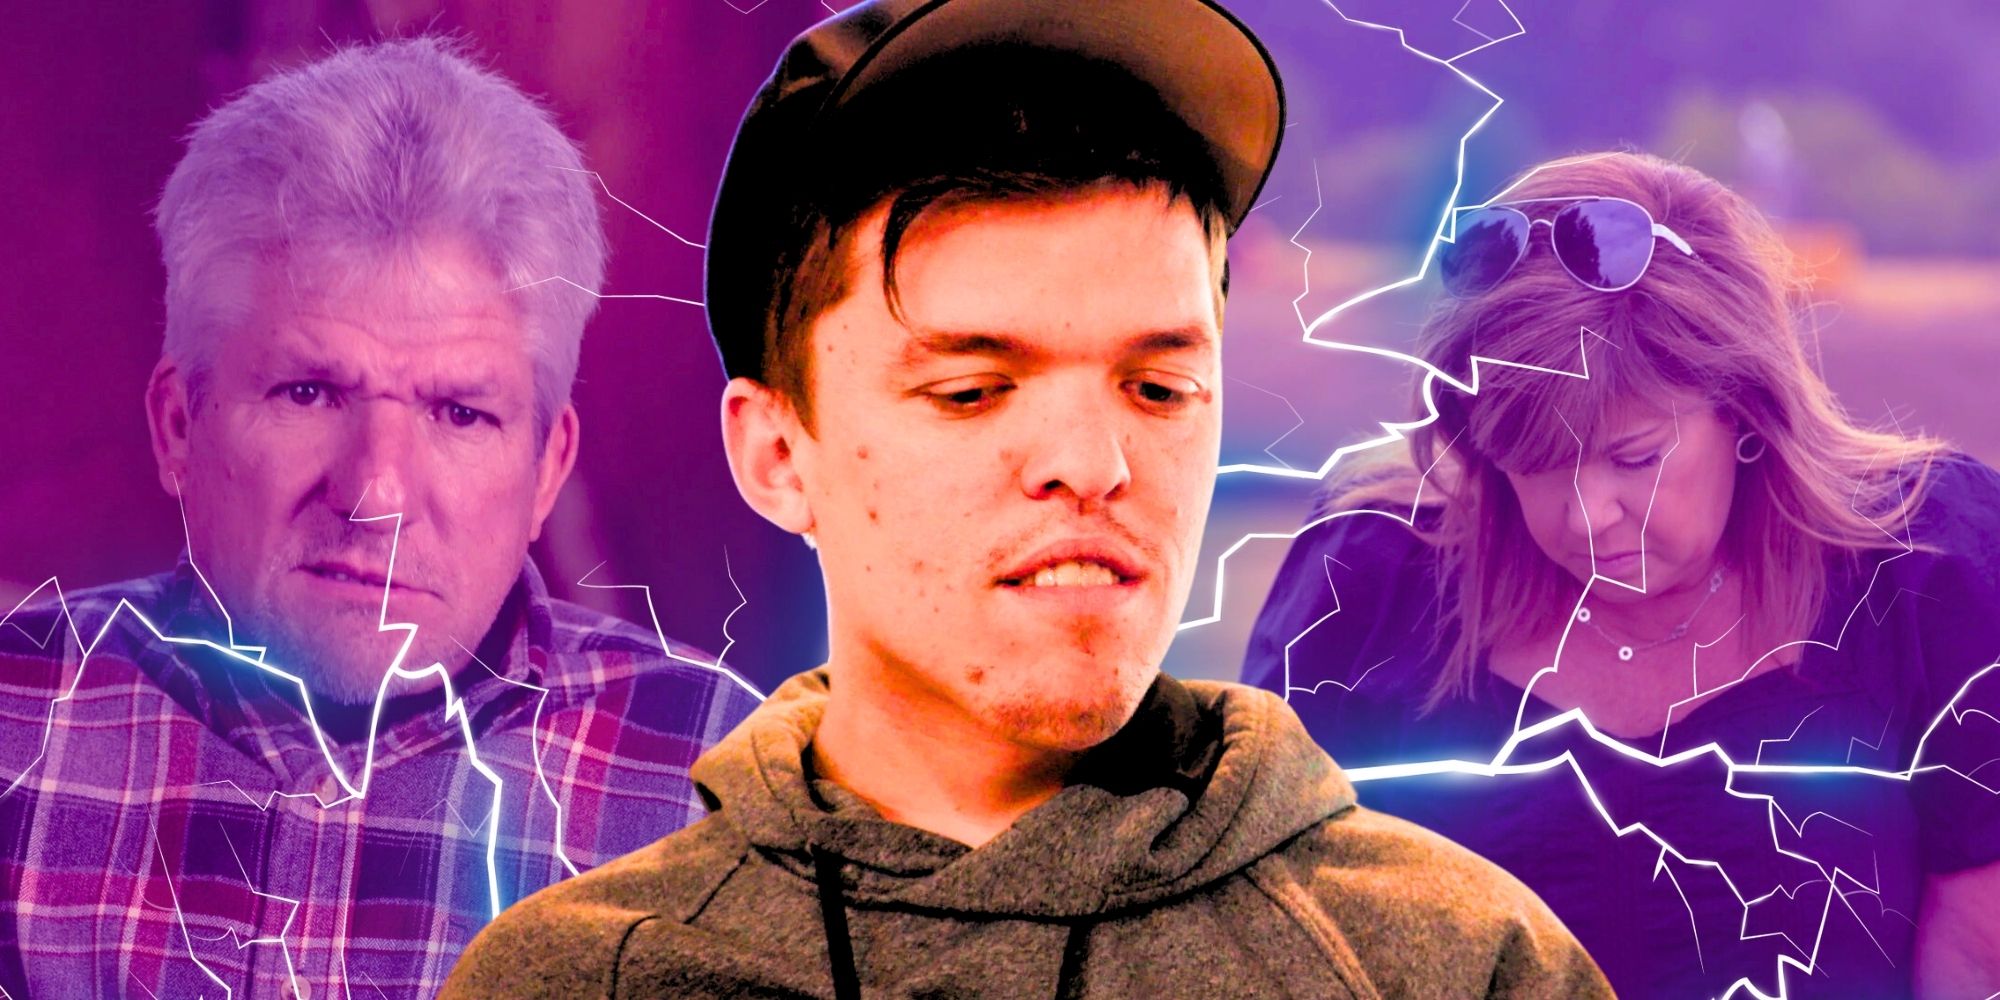 Little People, Big World’s Zach Roloff, flanked by Matt Roloff & Caryn Chandler, all looking serious, surrounded by lightning bolts